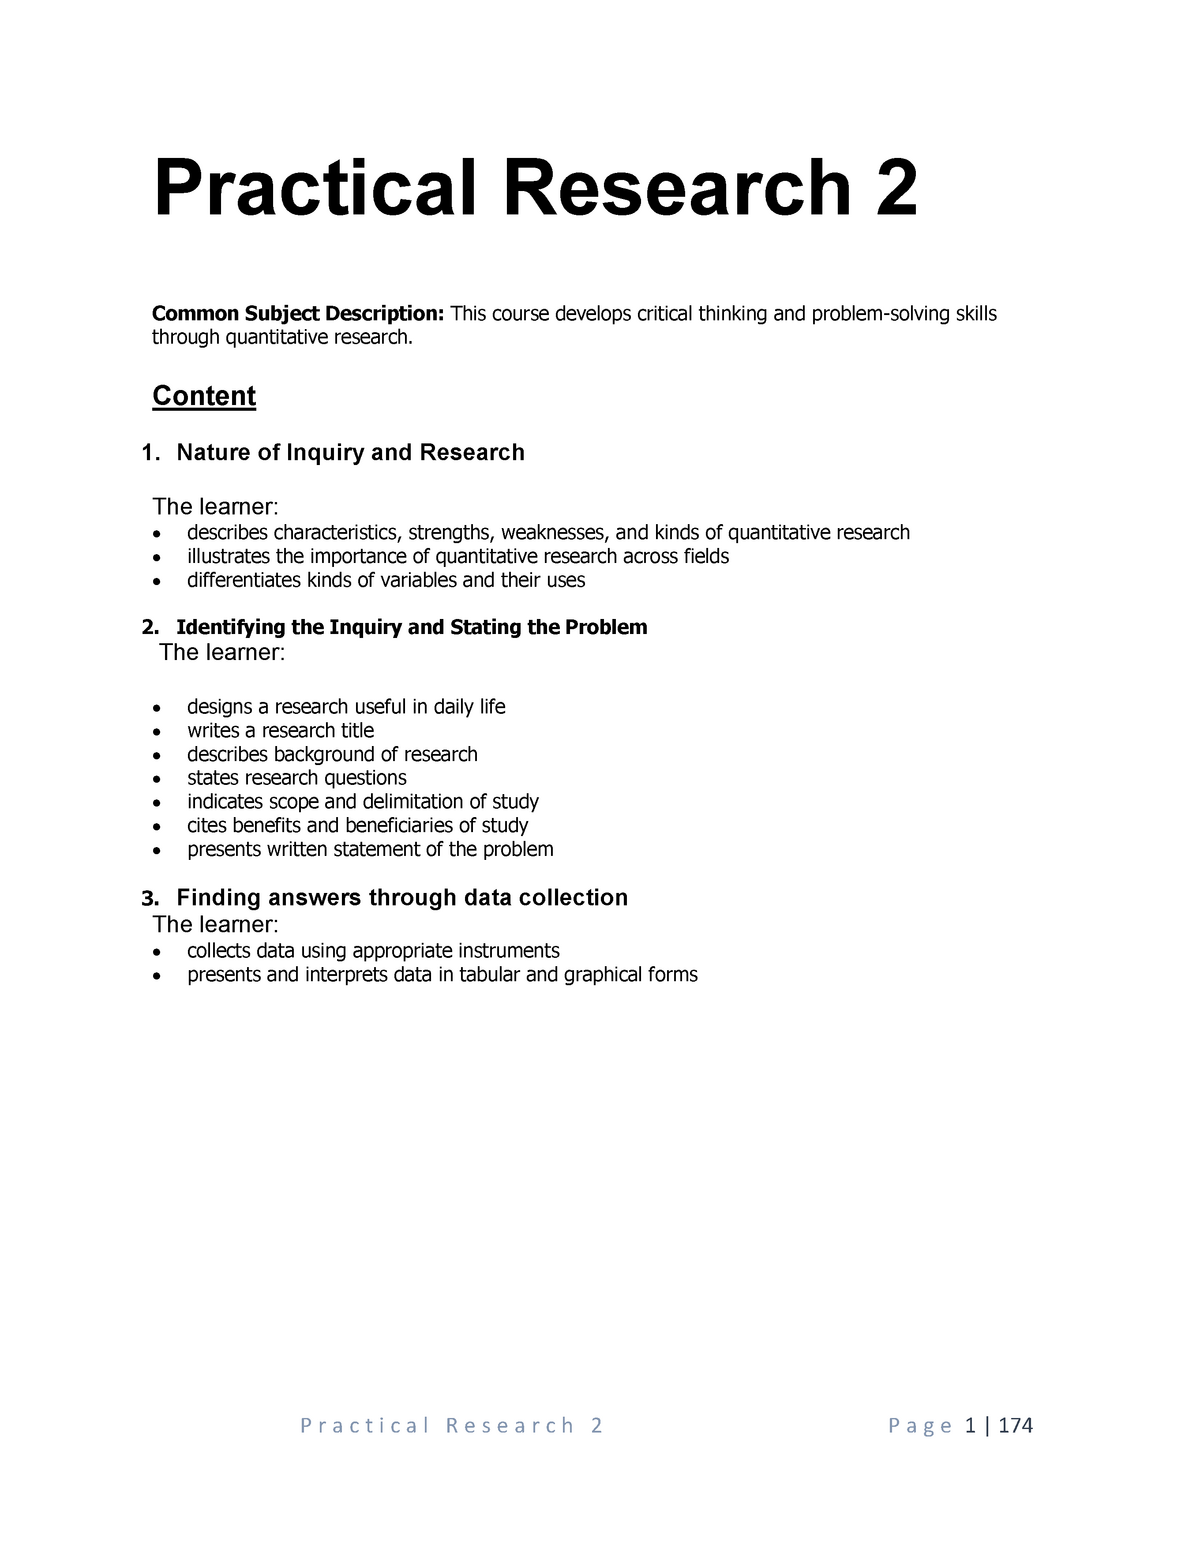 practical research 2 conclusion and recommendation